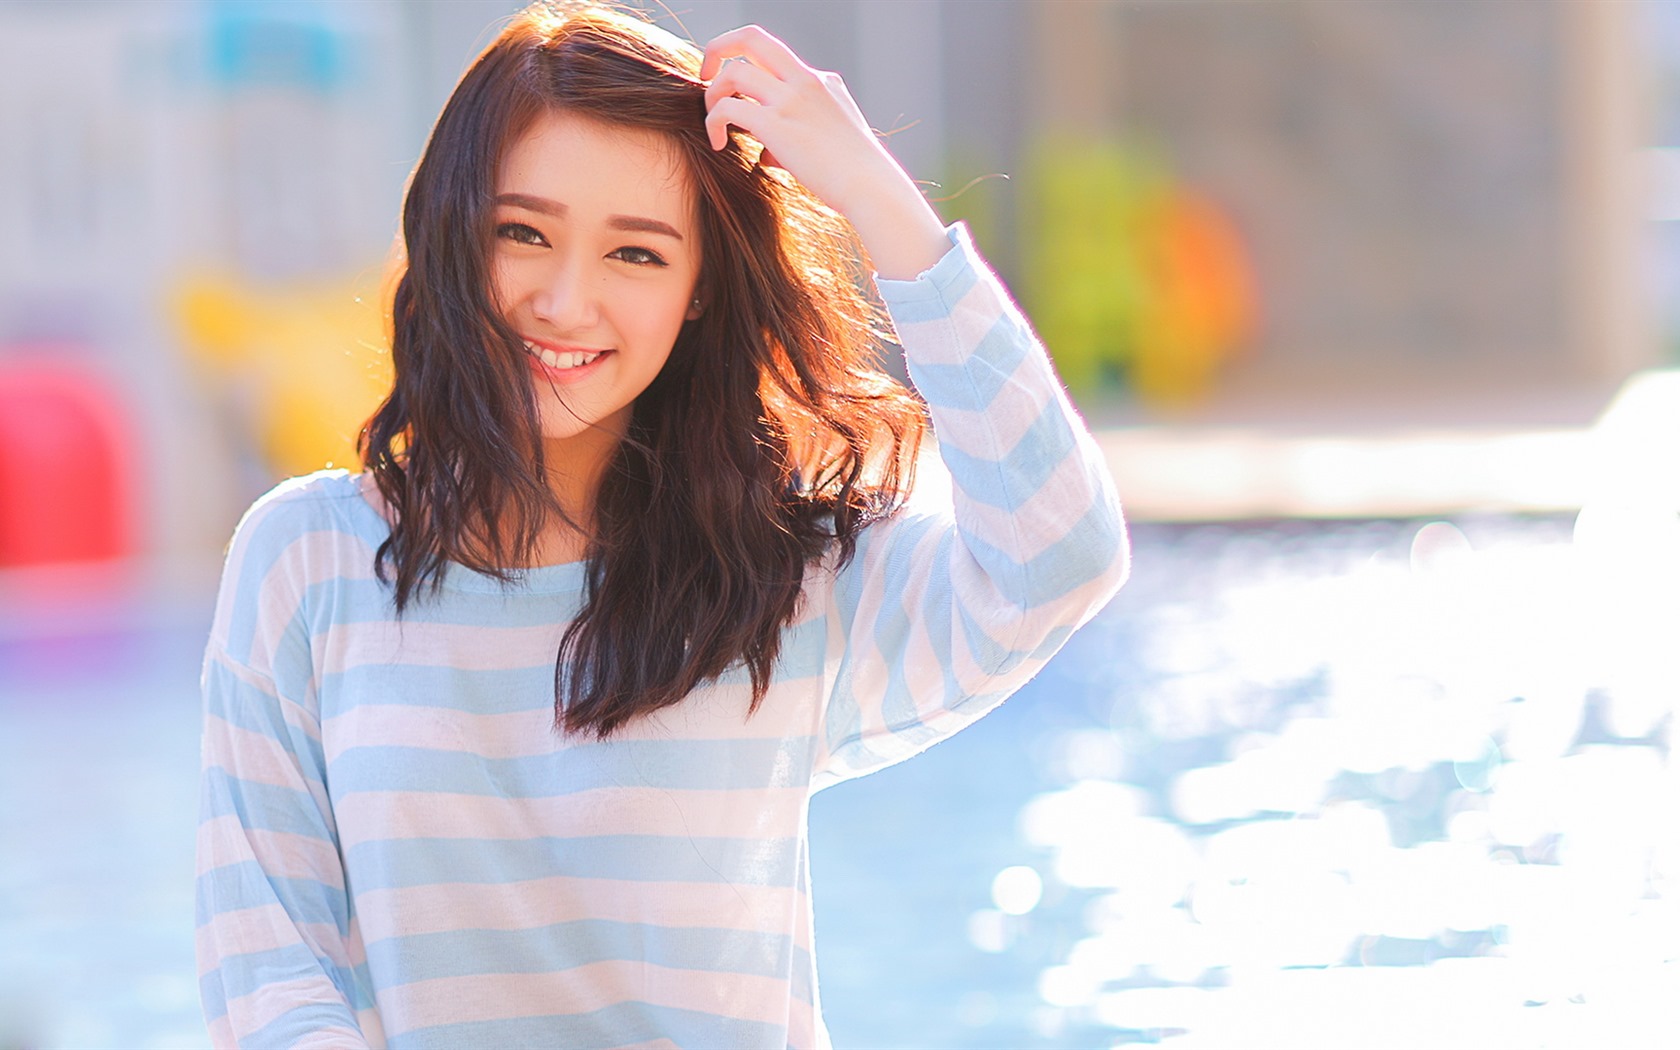 Pure and lovely young Asian girl HD wallpapers collection (1) #22 - 1680x1050